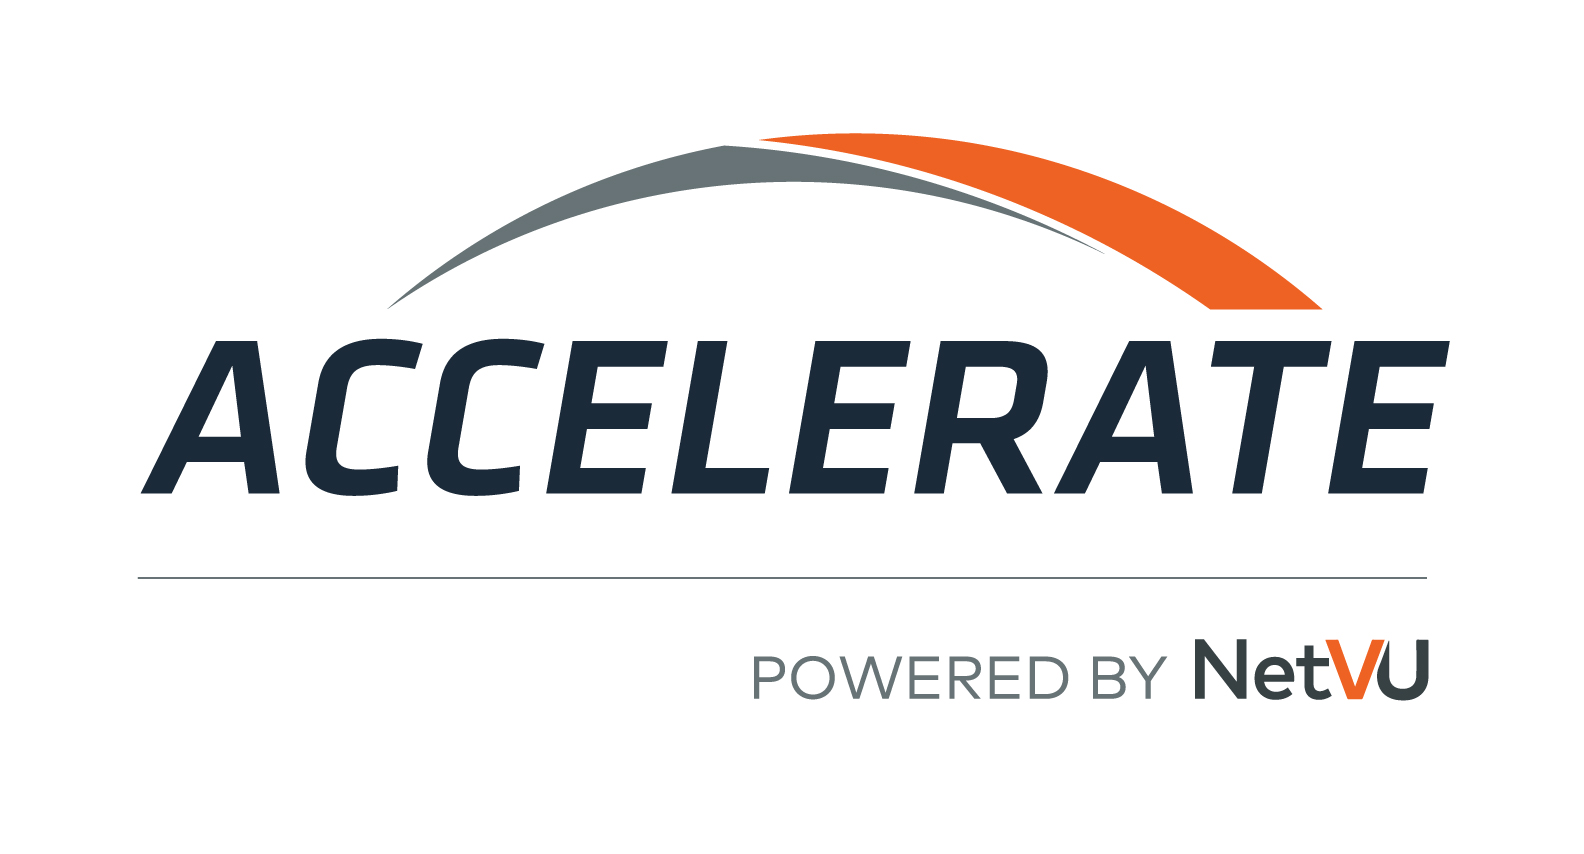 Accelerate powered by NetVU